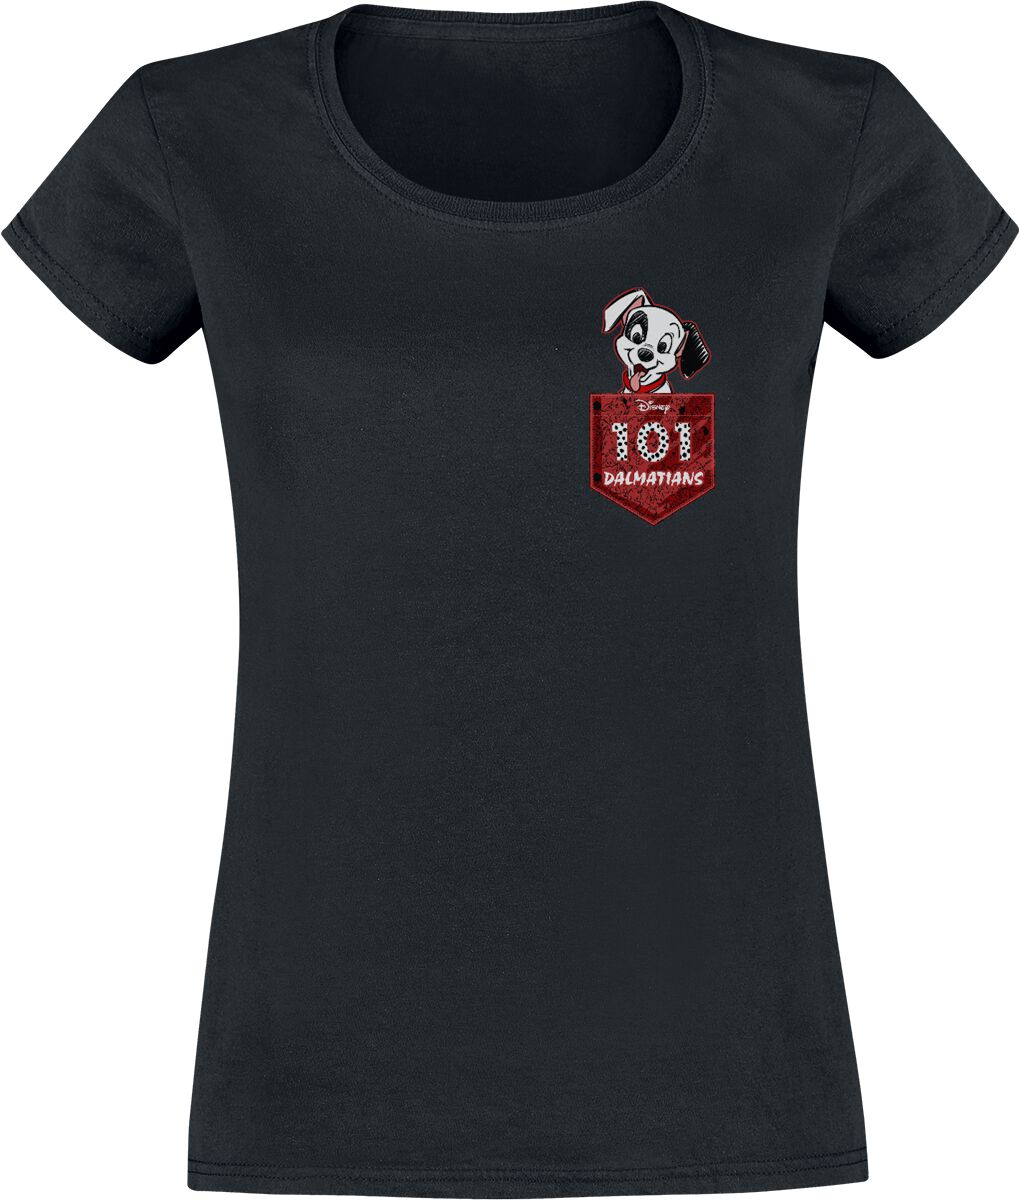 One Hundred And One Dalmatians Pocket Puppy T-Shirt black